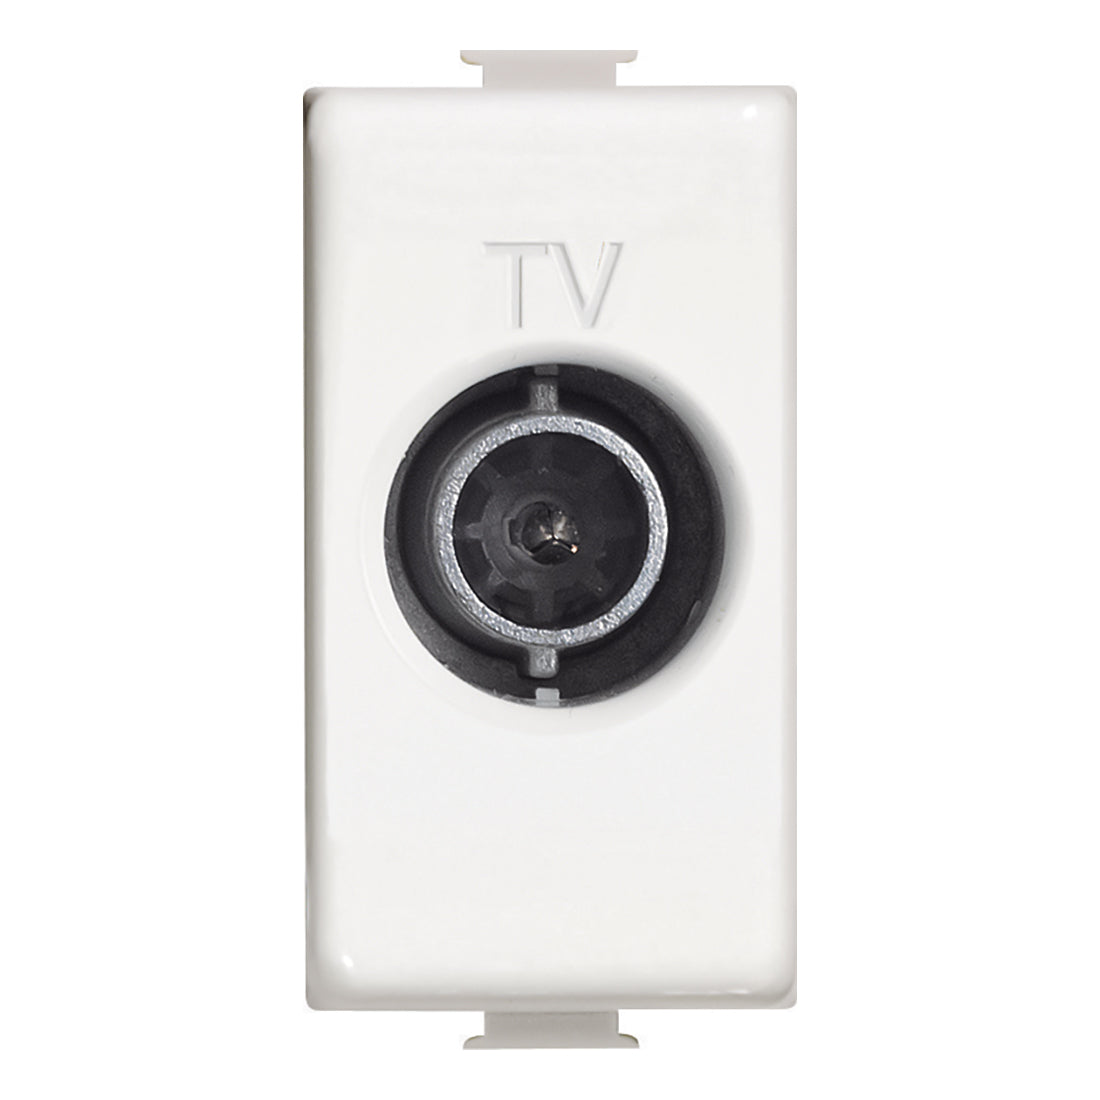 Bticino white TV and SAT socket for wired installation, coaxial star socket, male connector Ø 9.5 mm